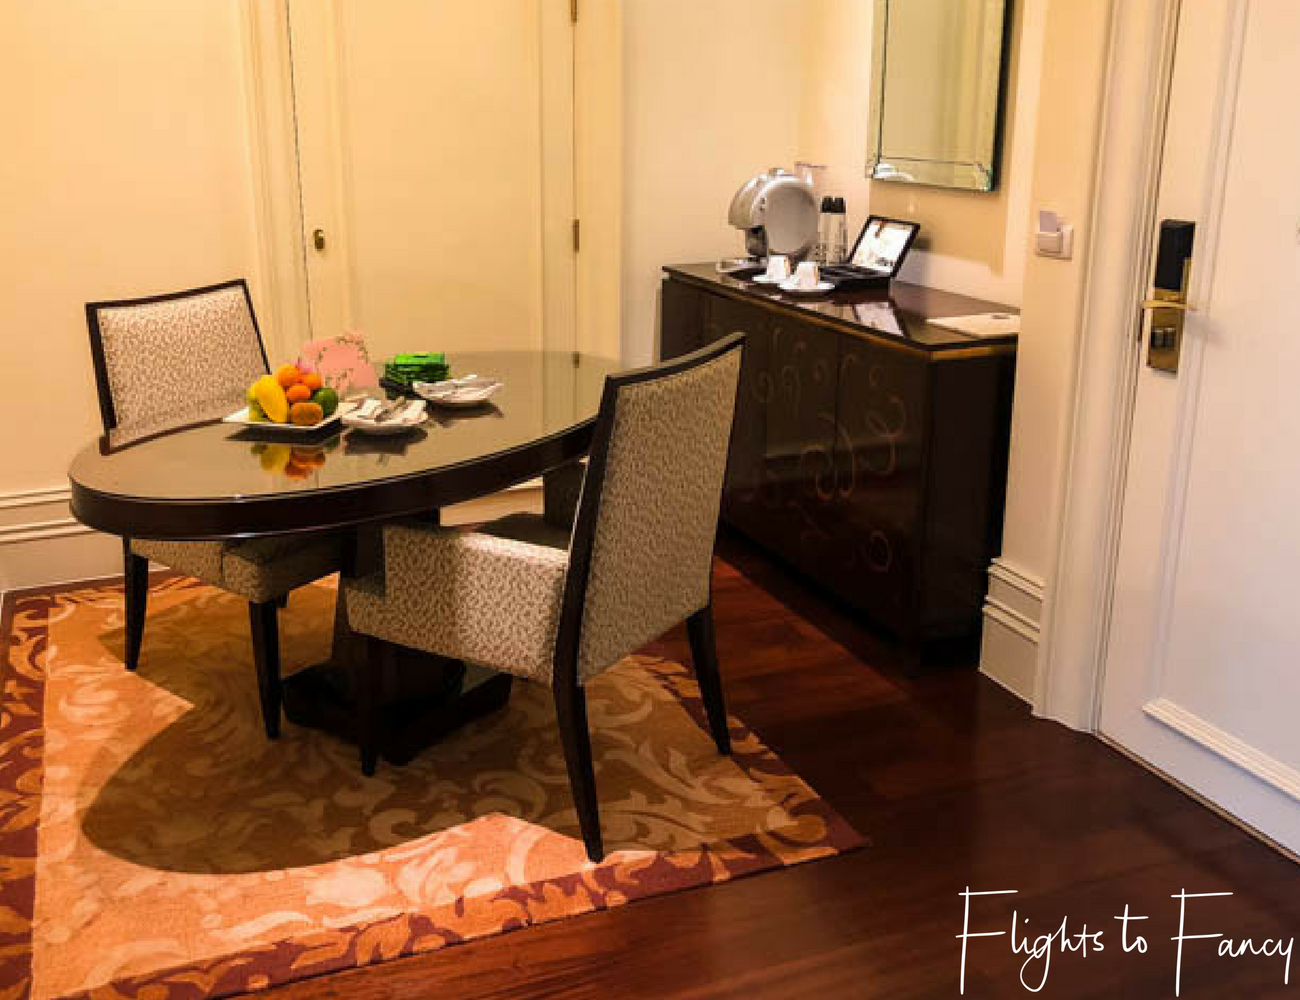 Flights To Fancy at Raffles Manila - One of my favourite hotels on Makati Ave